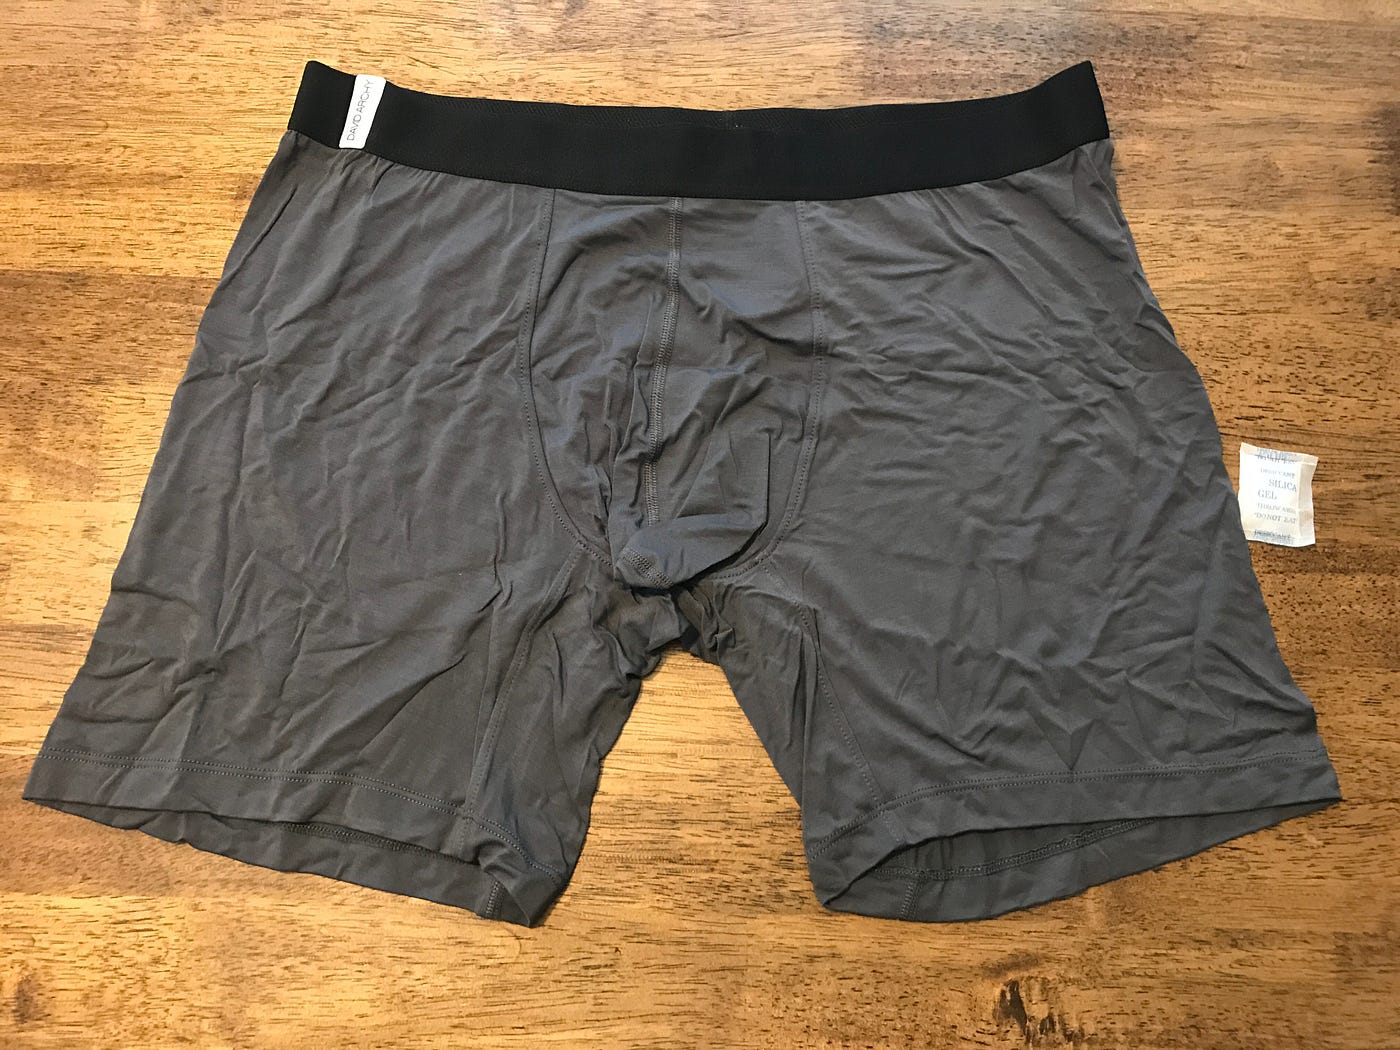 David Archy Ultra Soft Bamboo Basic Boxer Brief Review